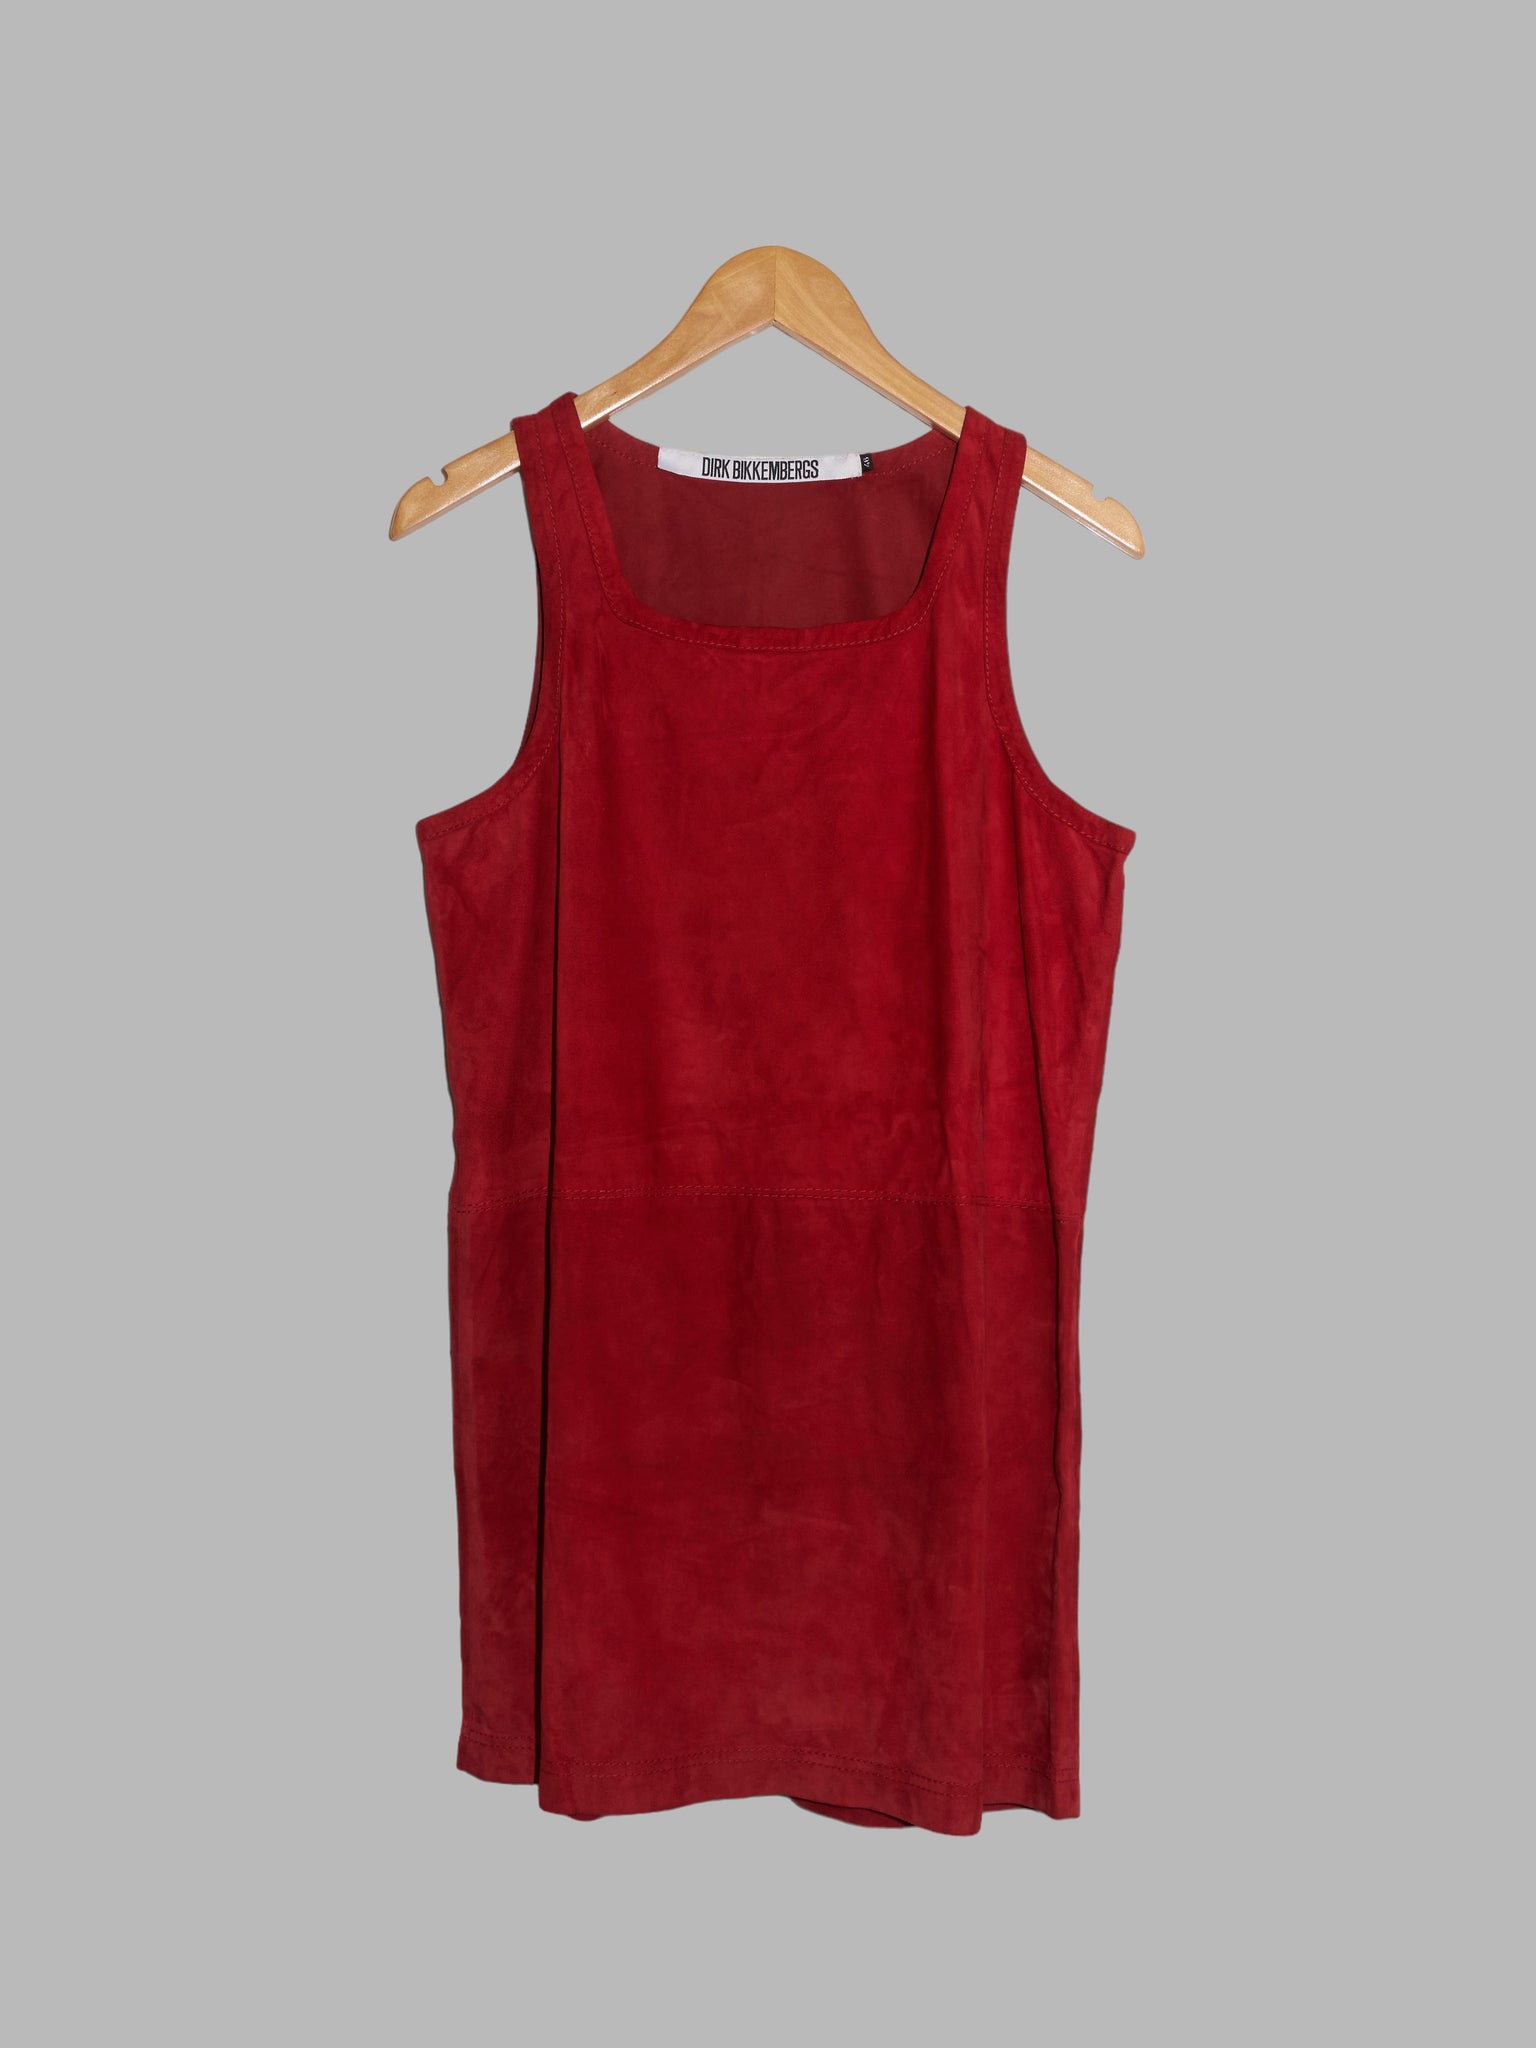 Dirk Bikkembergs 1990s 2000s red suede leather mini dress